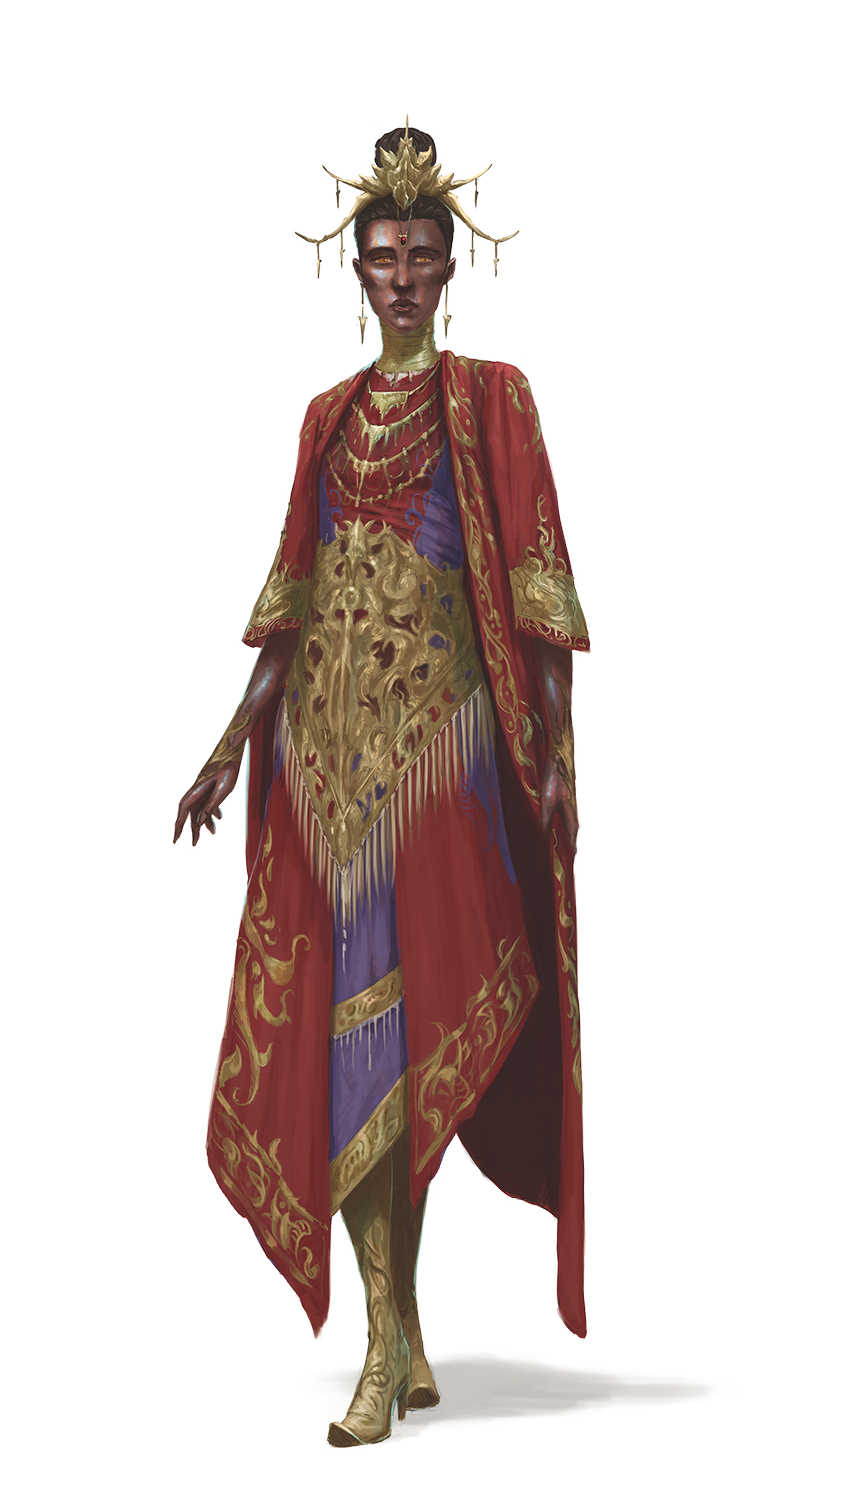 Artist: Maichol Quinto - a, ophidian humanoid, with dark skin, dressed in red and purple robes, with jeweled gold accents and hairpiece. 